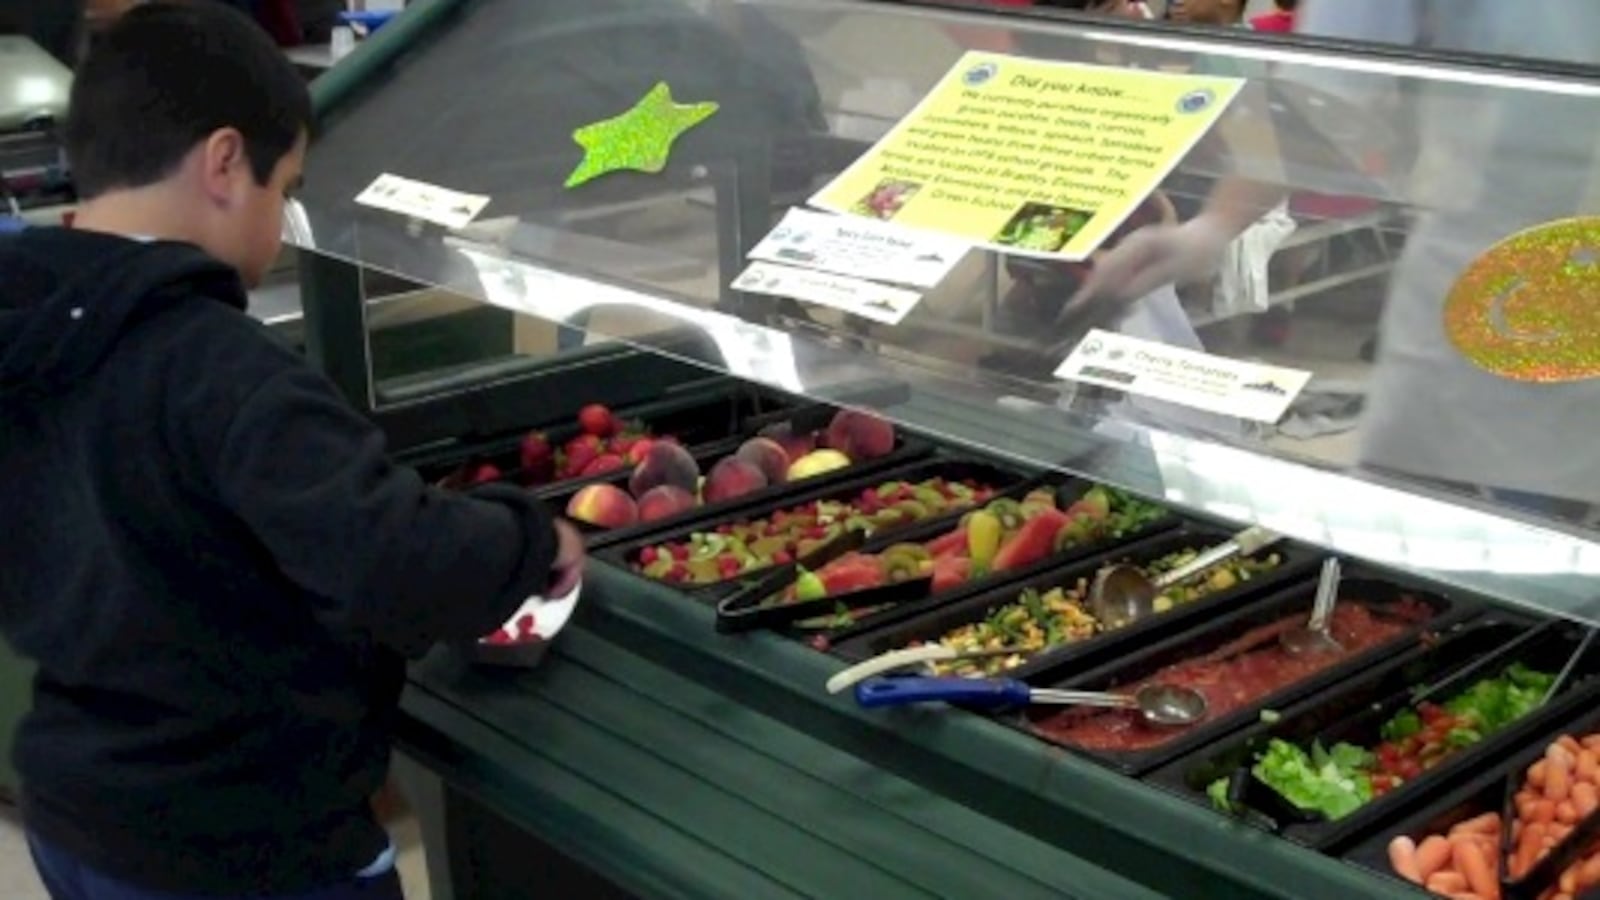 A student at Lowry Elementary chooses fresh fruit from his school's salad bar.